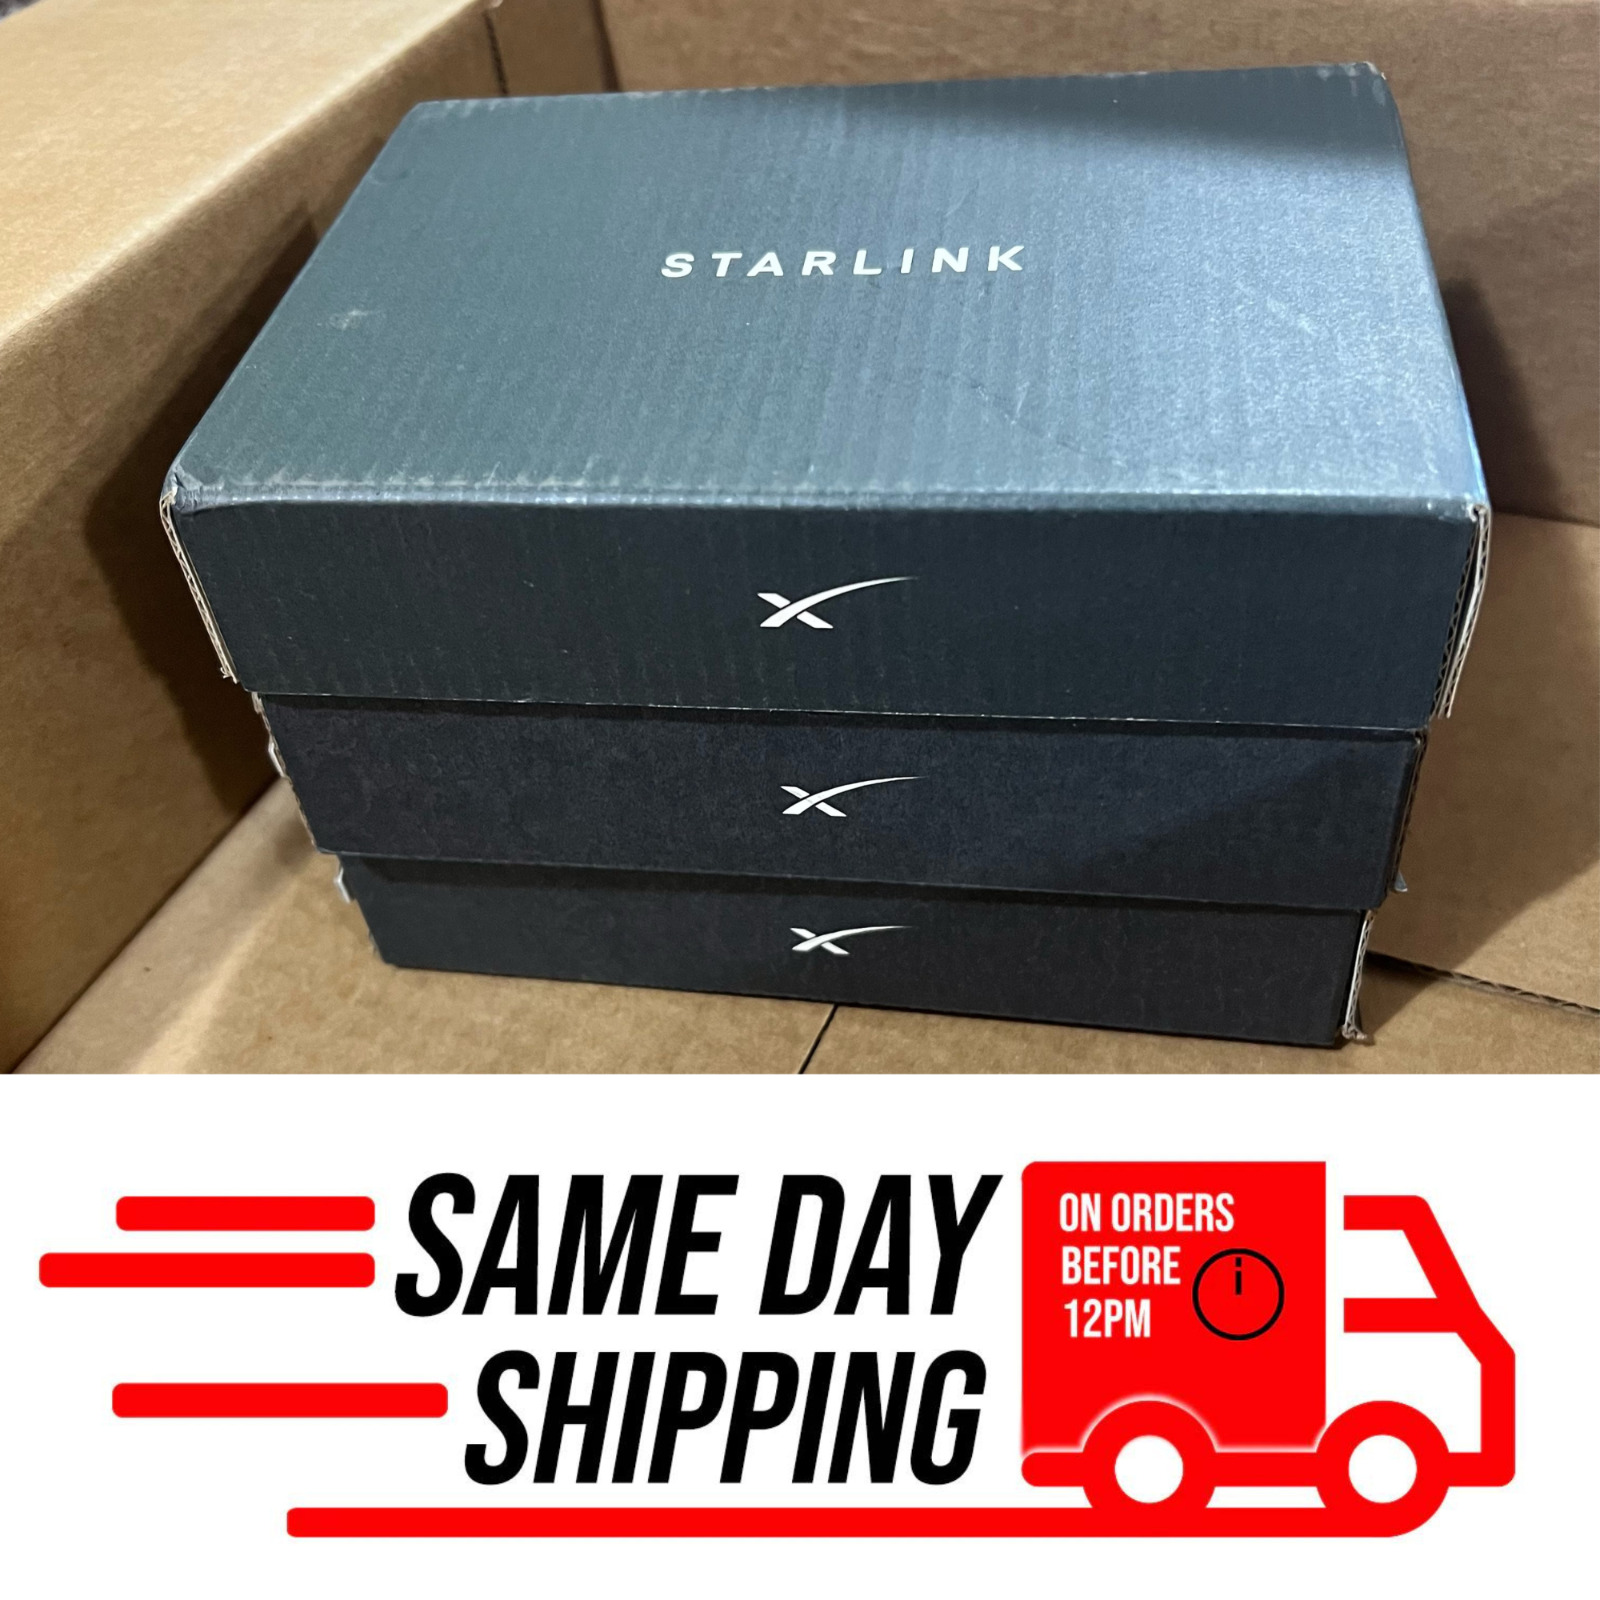 Starlink Ethernet Adapter V2 In Hand SAME DAY SHIPPING USA Seller